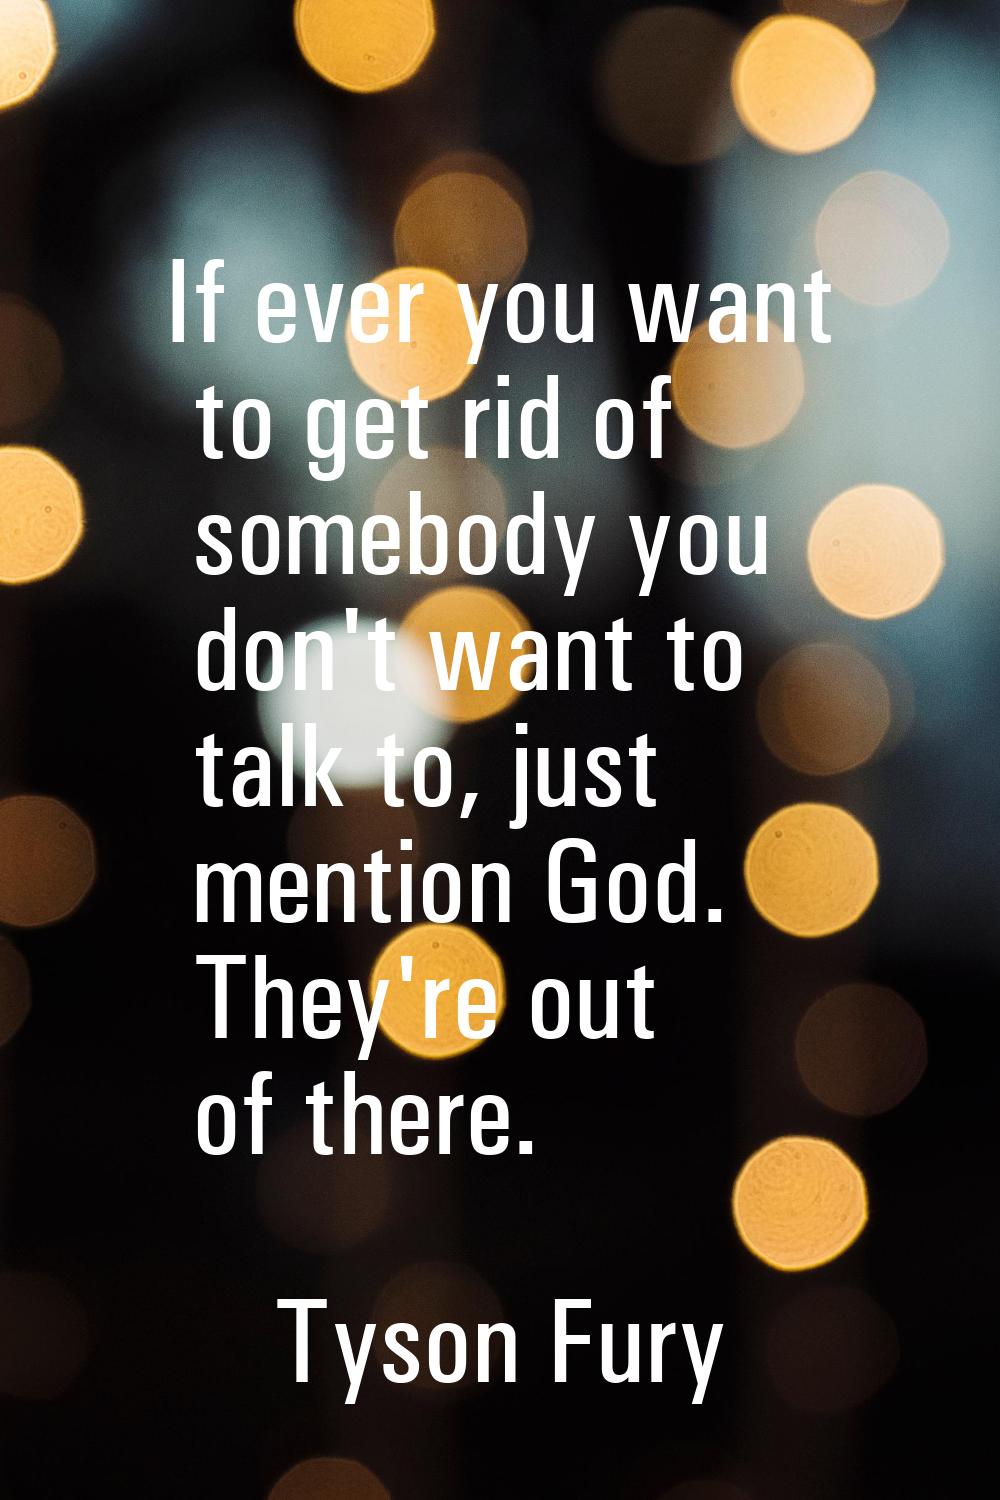 If ever you want to get rid of somebody you don't want to talk to, just mention God. They're out of